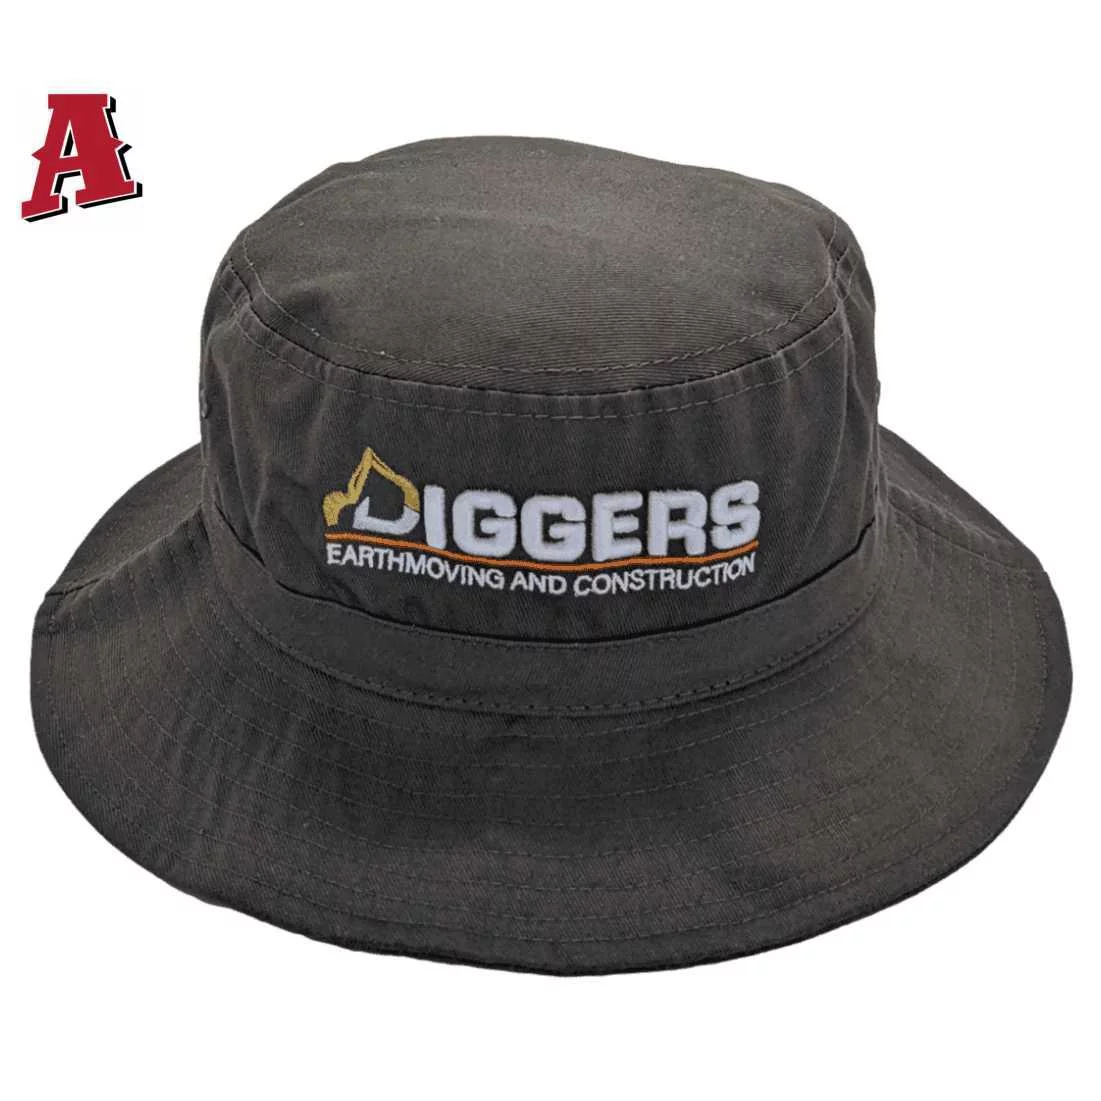 Diggers Earthmoving and Construction Segenhoe NSW Aussie Bucket Hat One Size Fits All with Optional Brim Width Dark Grey